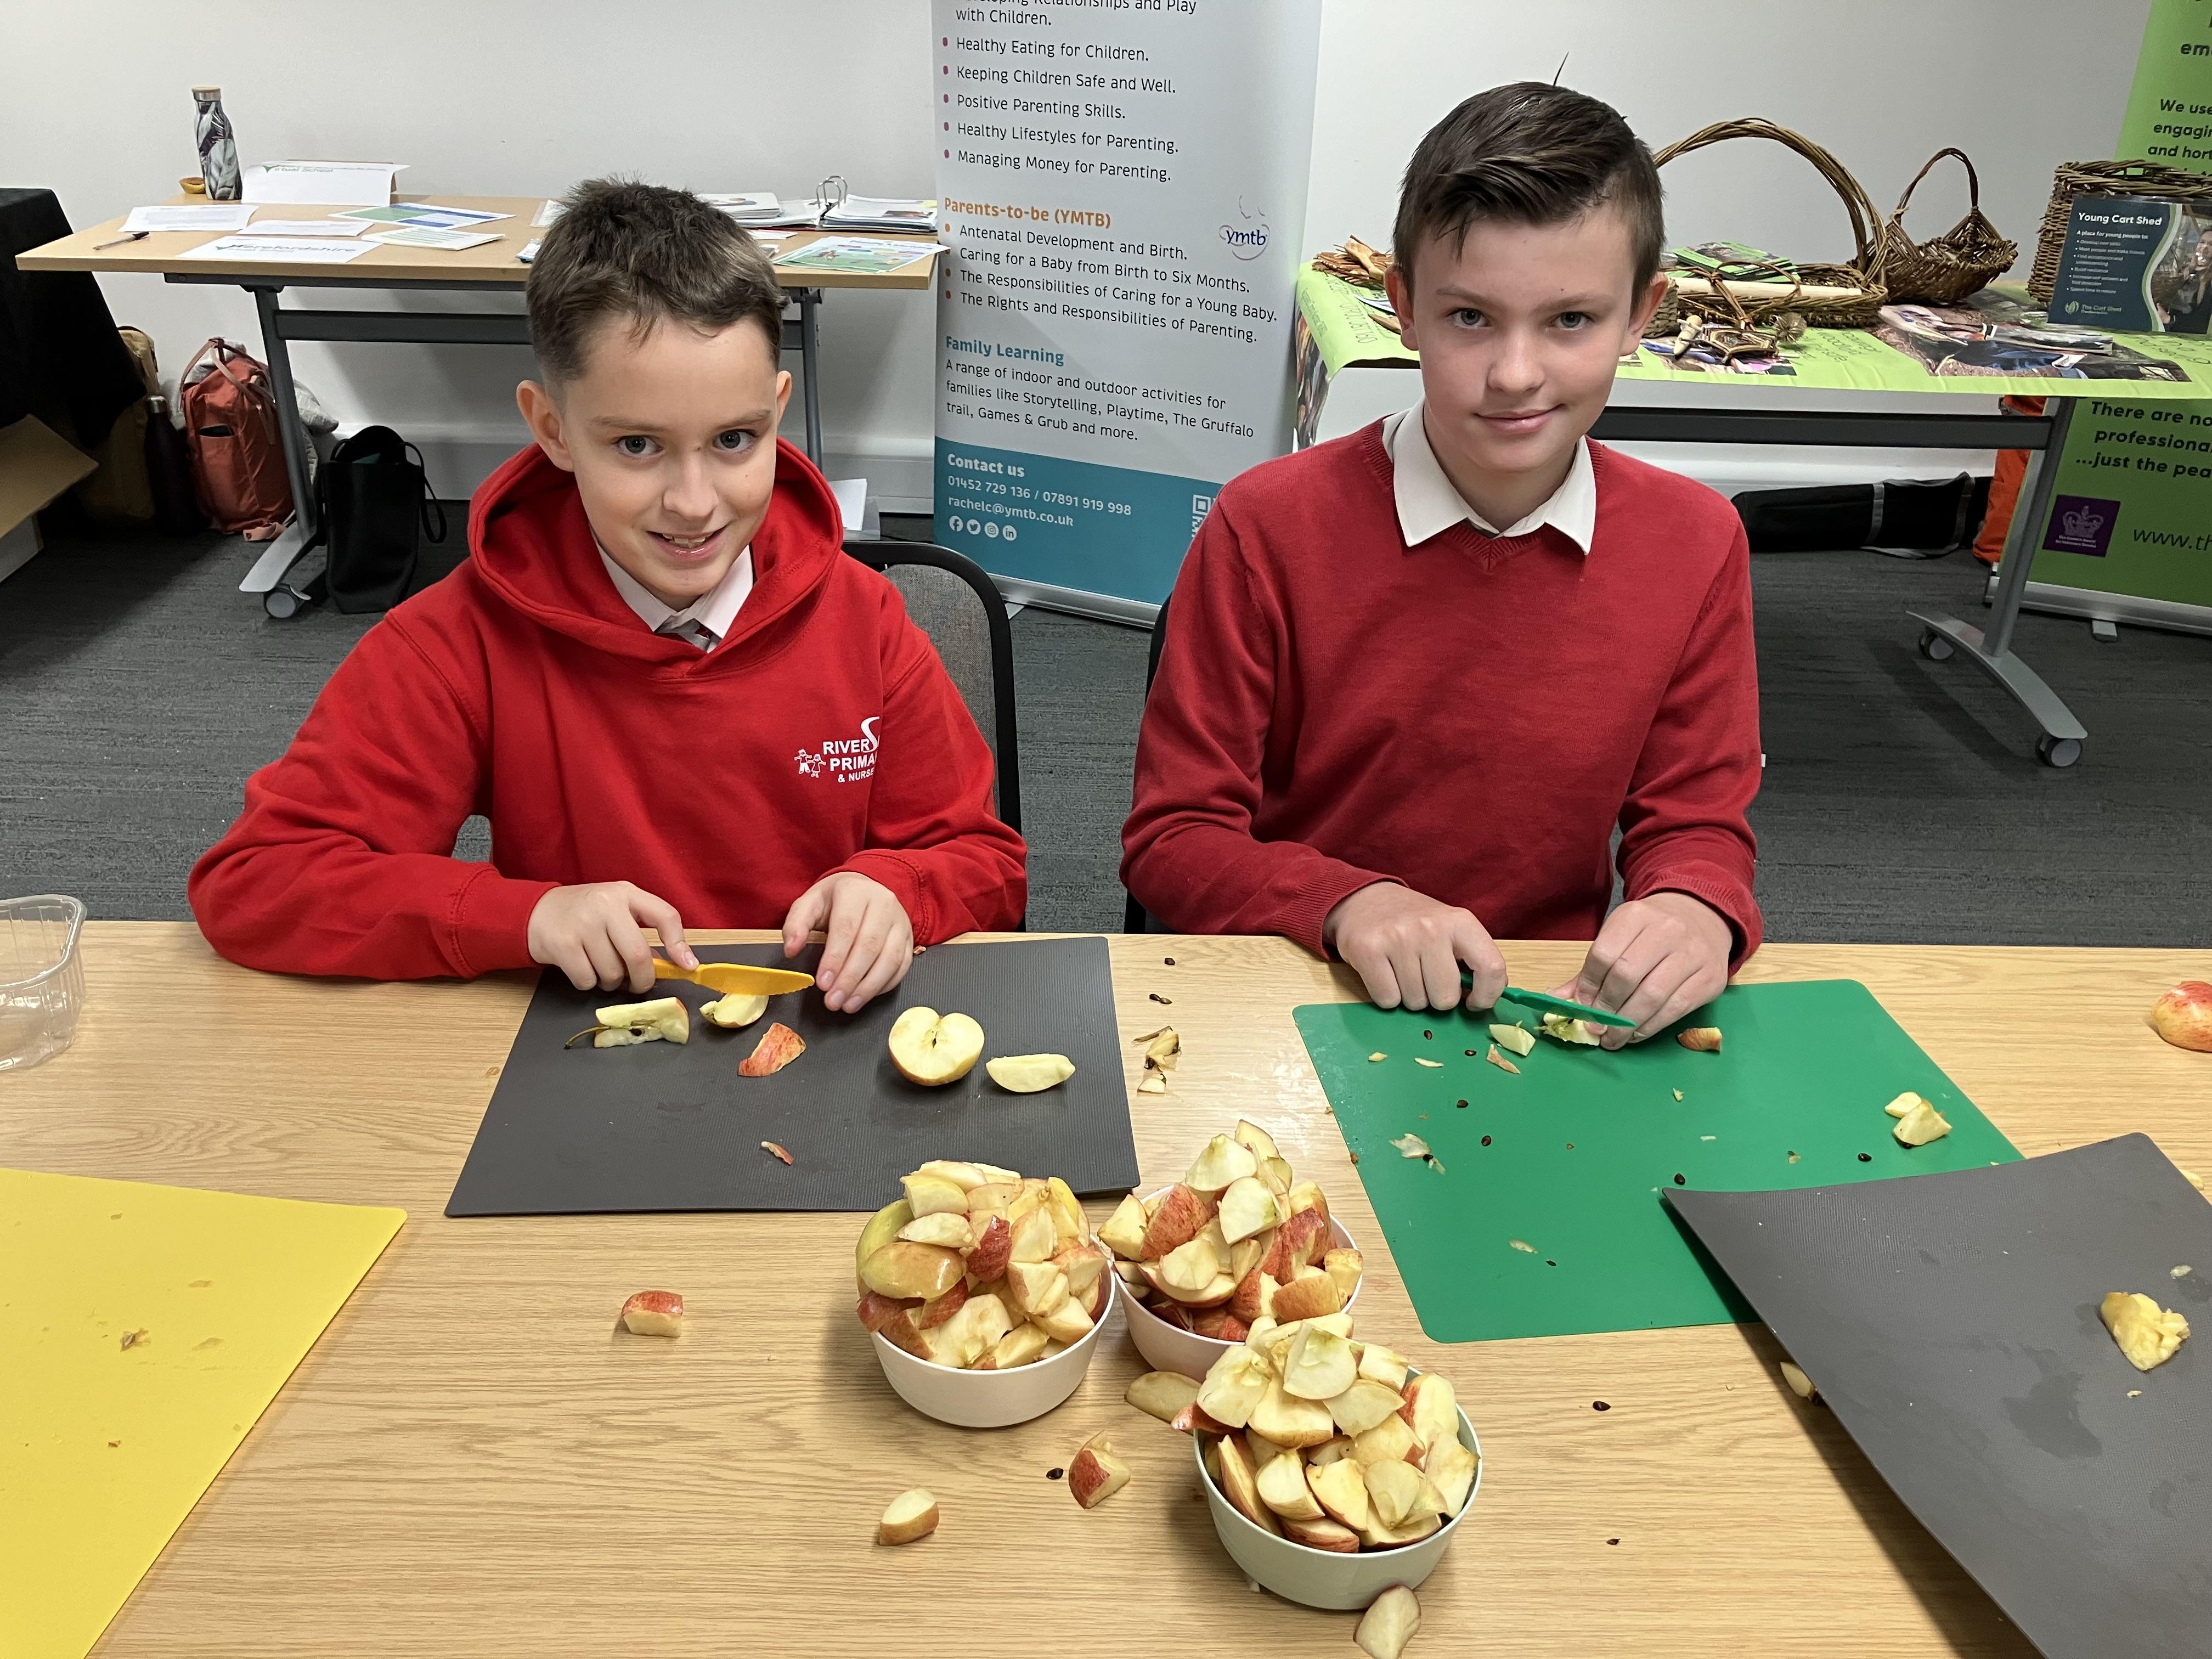 Herefordshire Healthy School launch event